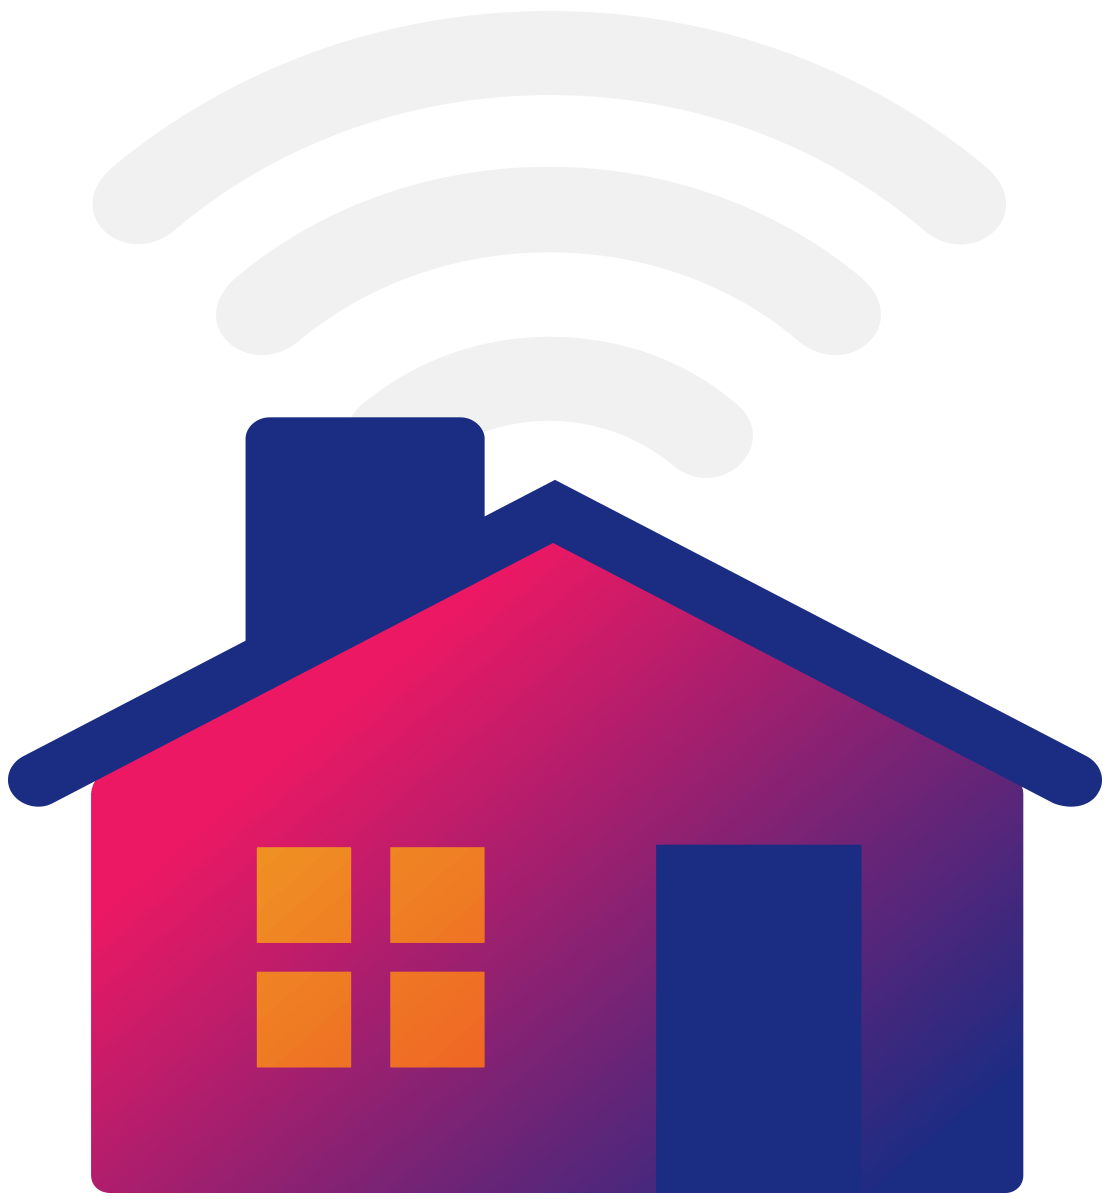 image of house with internet service